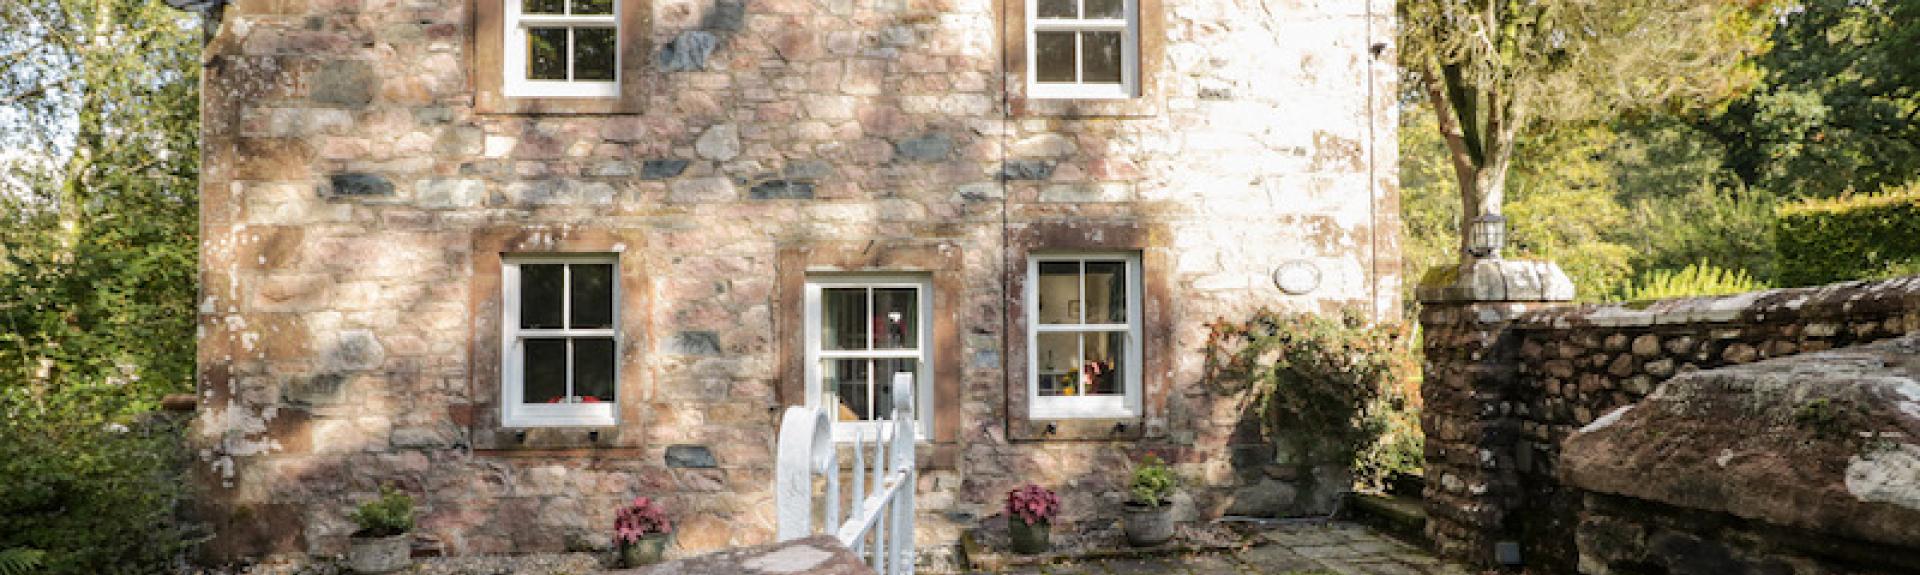 A stone-built, 2-storey cottage in Cumbria overlooks a large lawn.